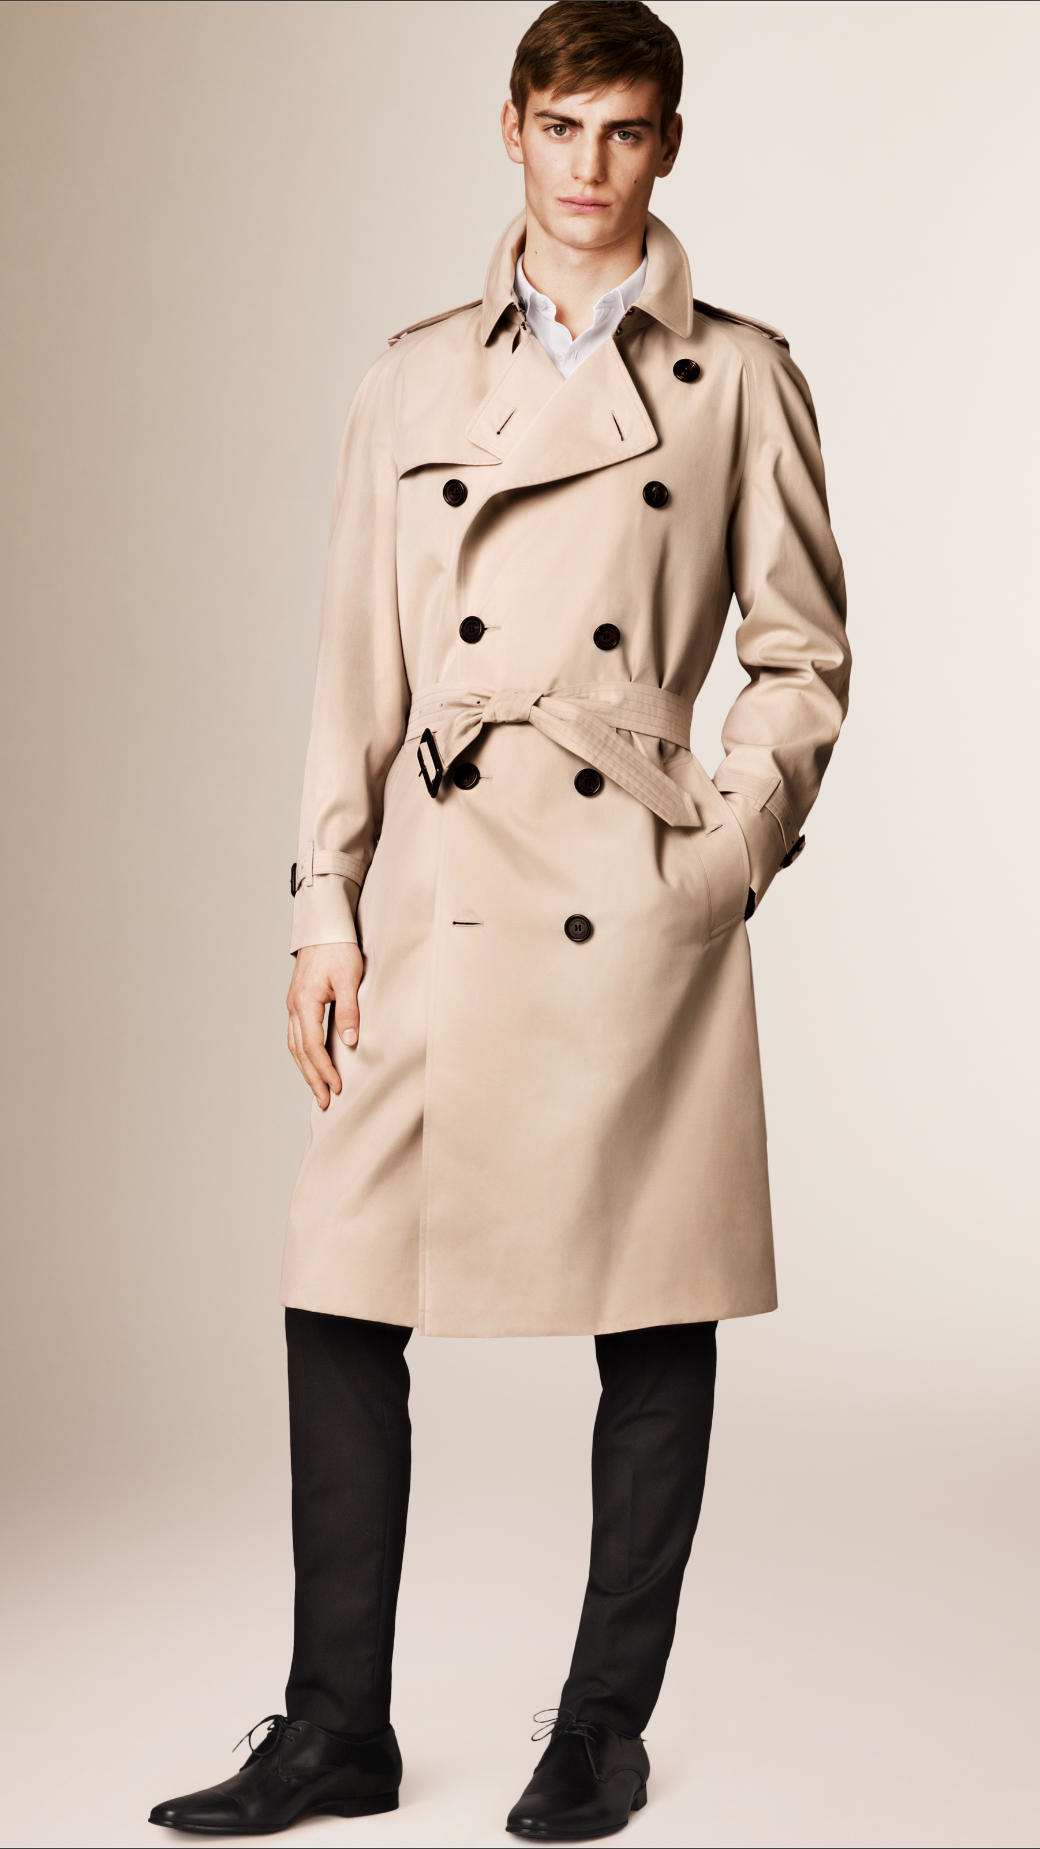 Lyst - Burberry The Westminster - Long Heritage Trench Coat in Natural ...